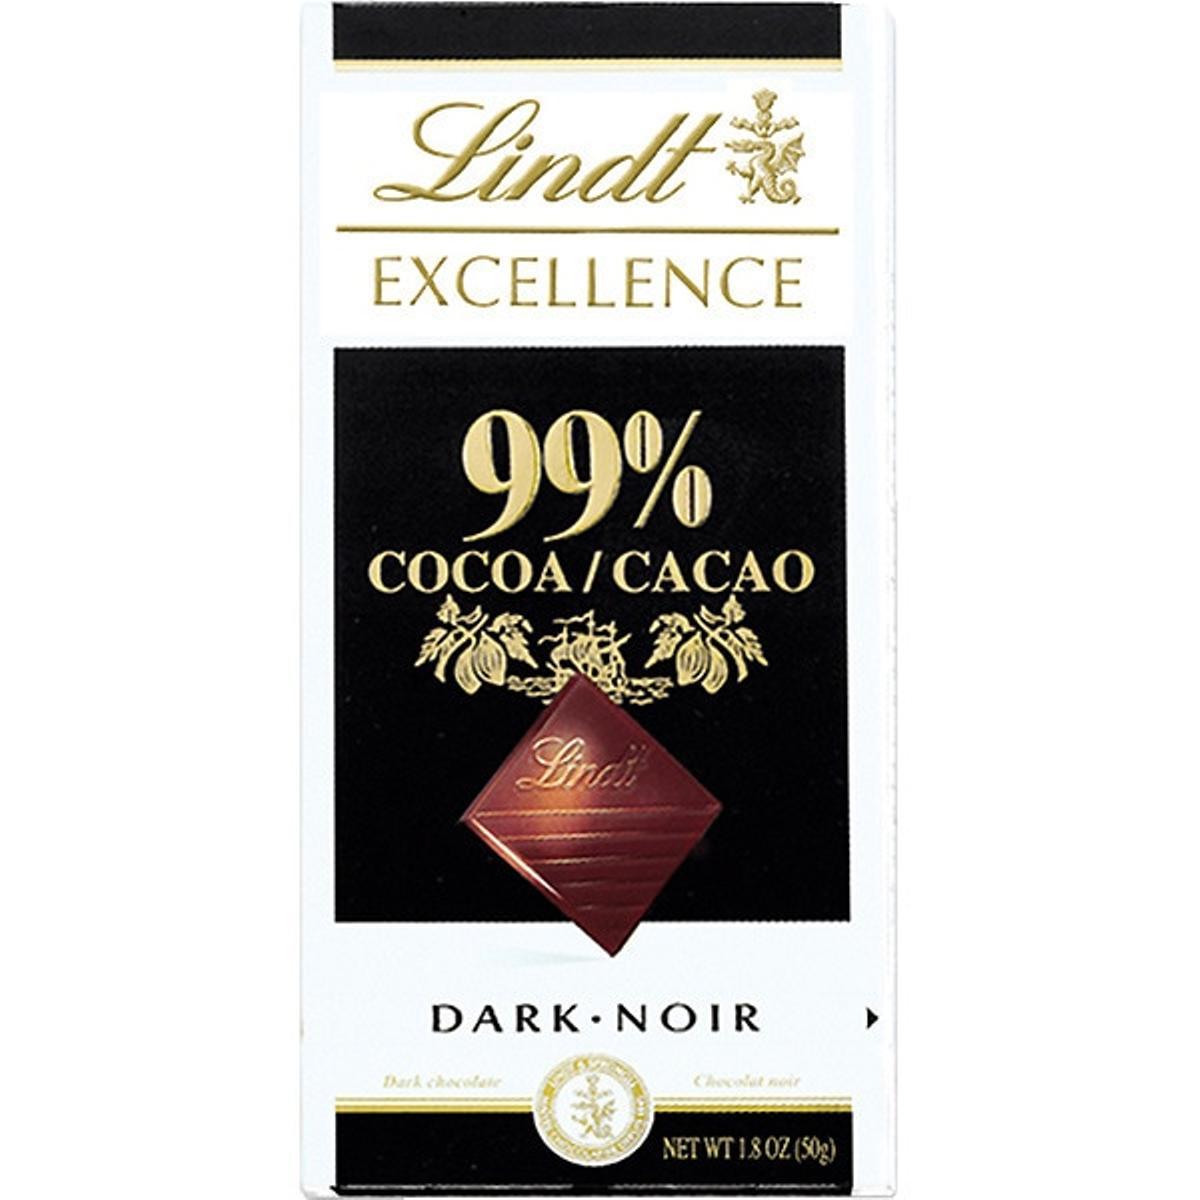 Chocolate Lindt Excellence 99% cacao